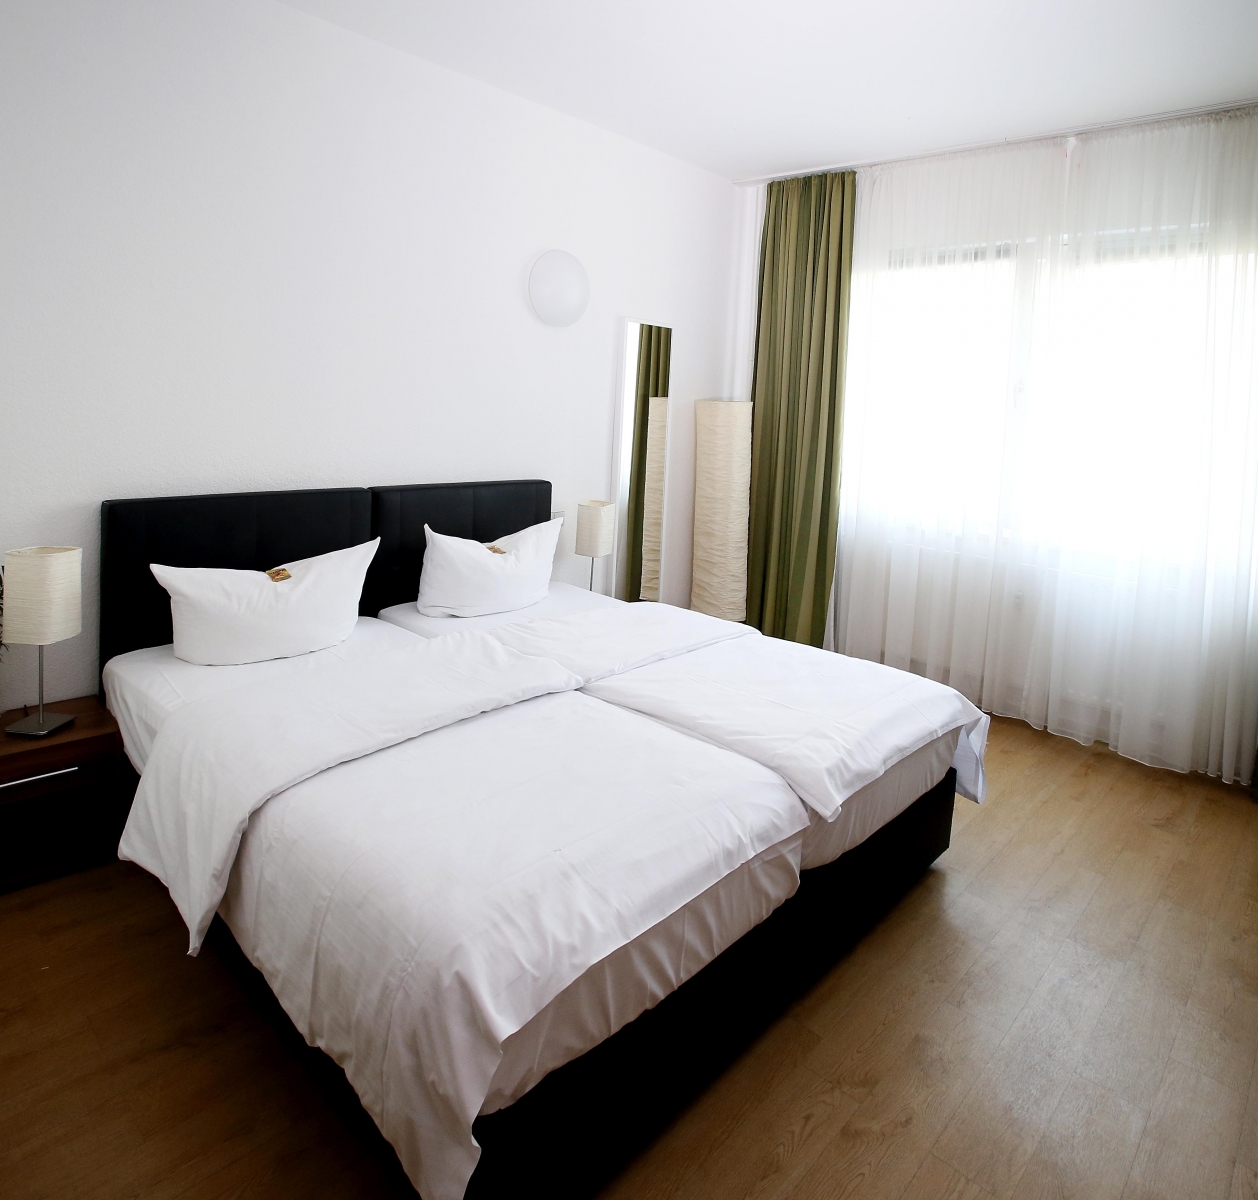 Hotel Lützow <br/>53.92 ew <br/> <a href='http://vakantieoplossing.nl/outpage/?id=9f1a4597987bcd00bf3908834a1ca6ae' target='_blank'>View Details</a>